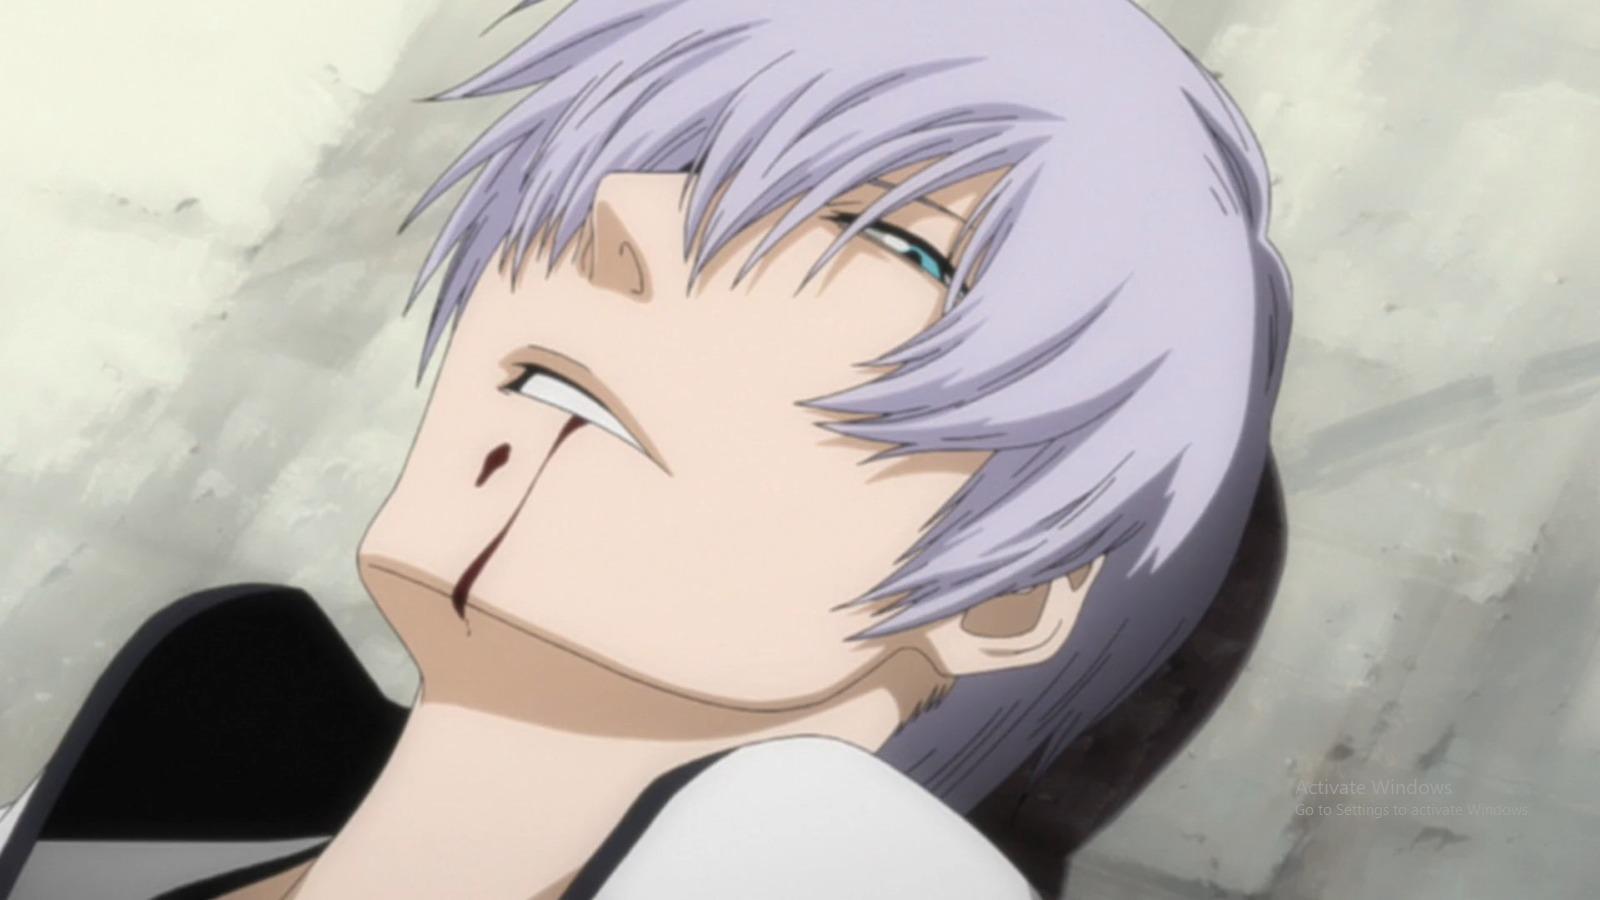 An image of Gin Ichimaru shortly before his death